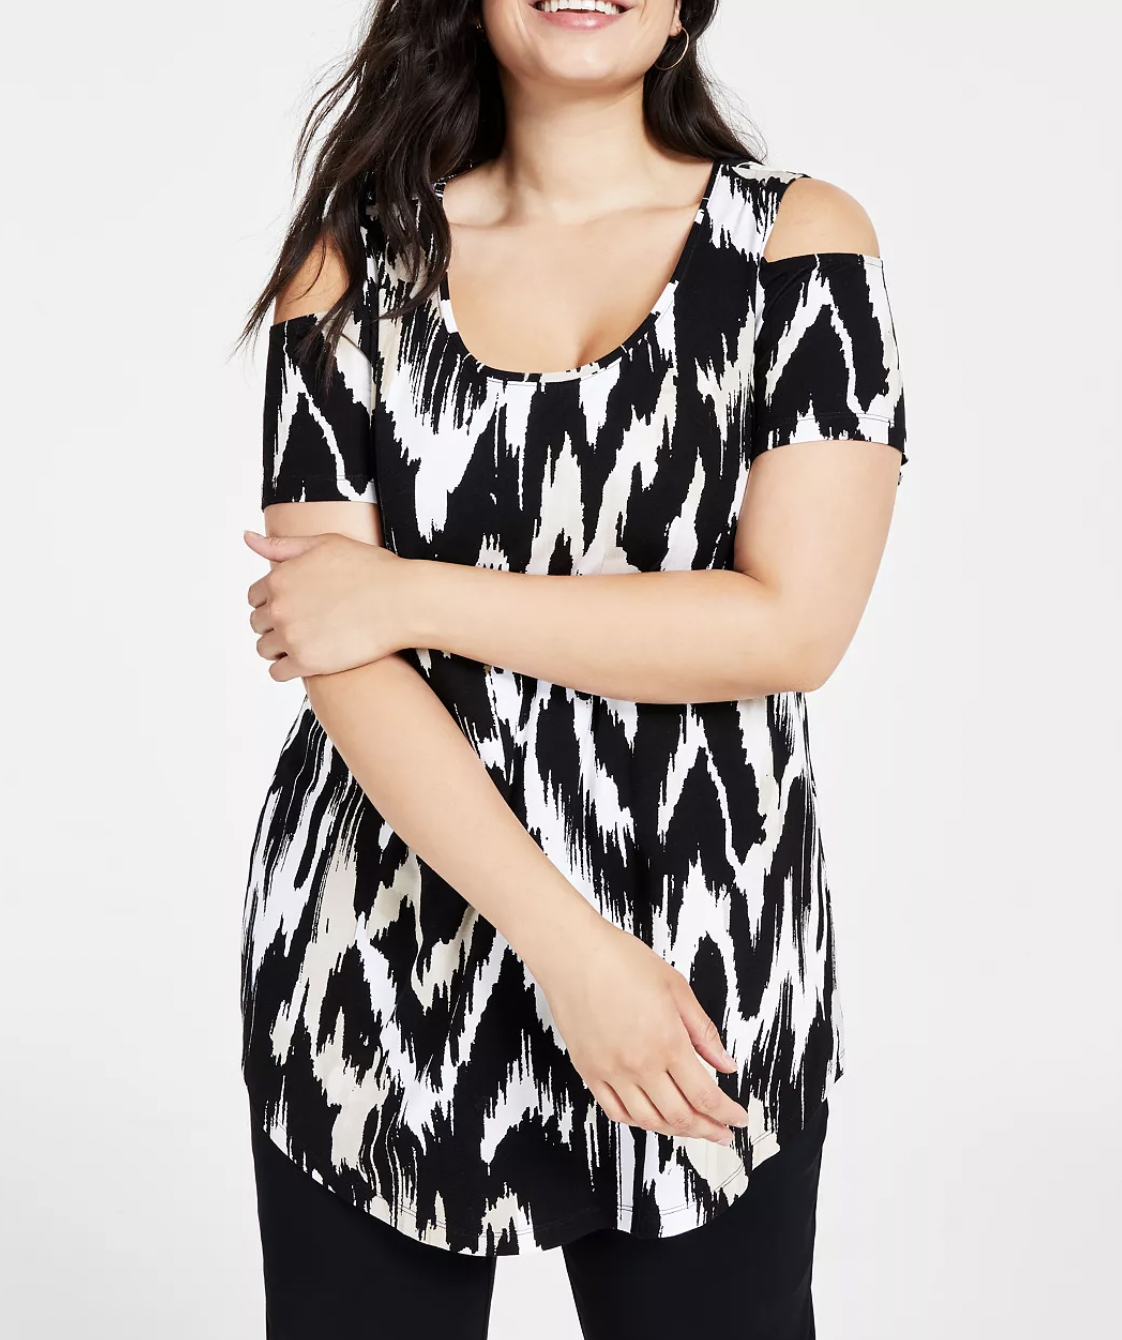 JM COLLECTION Plus Size Printed Cold-Shoulder Top, Created for Macy's